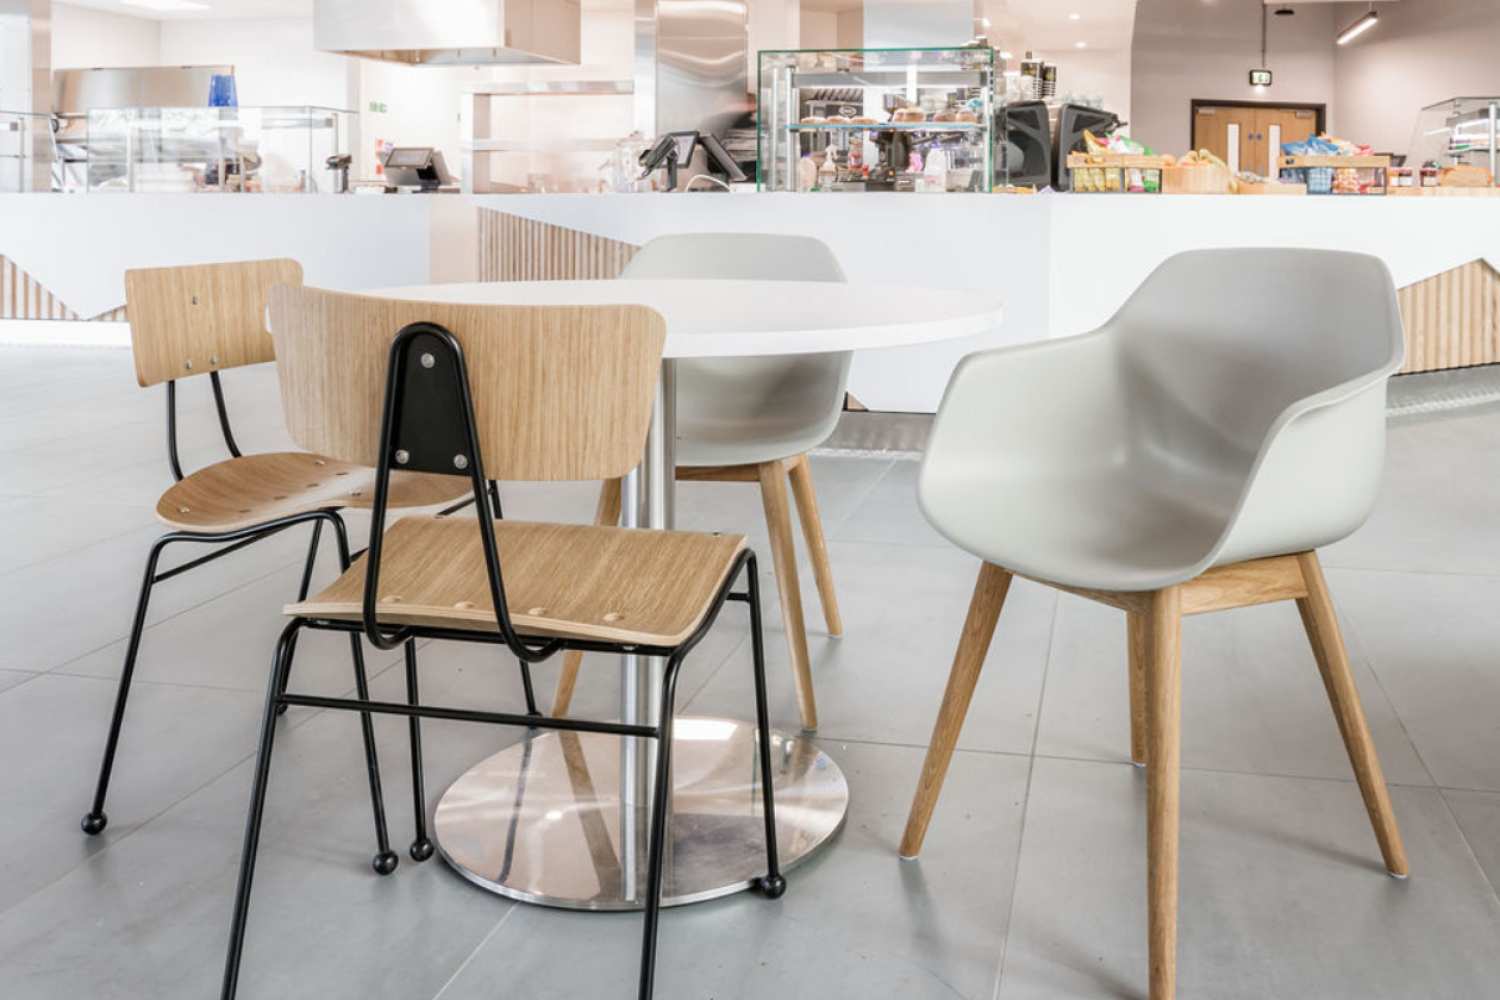 A white Ocee and Four Design table and chairs in a cafeteria at the University of Sheffield